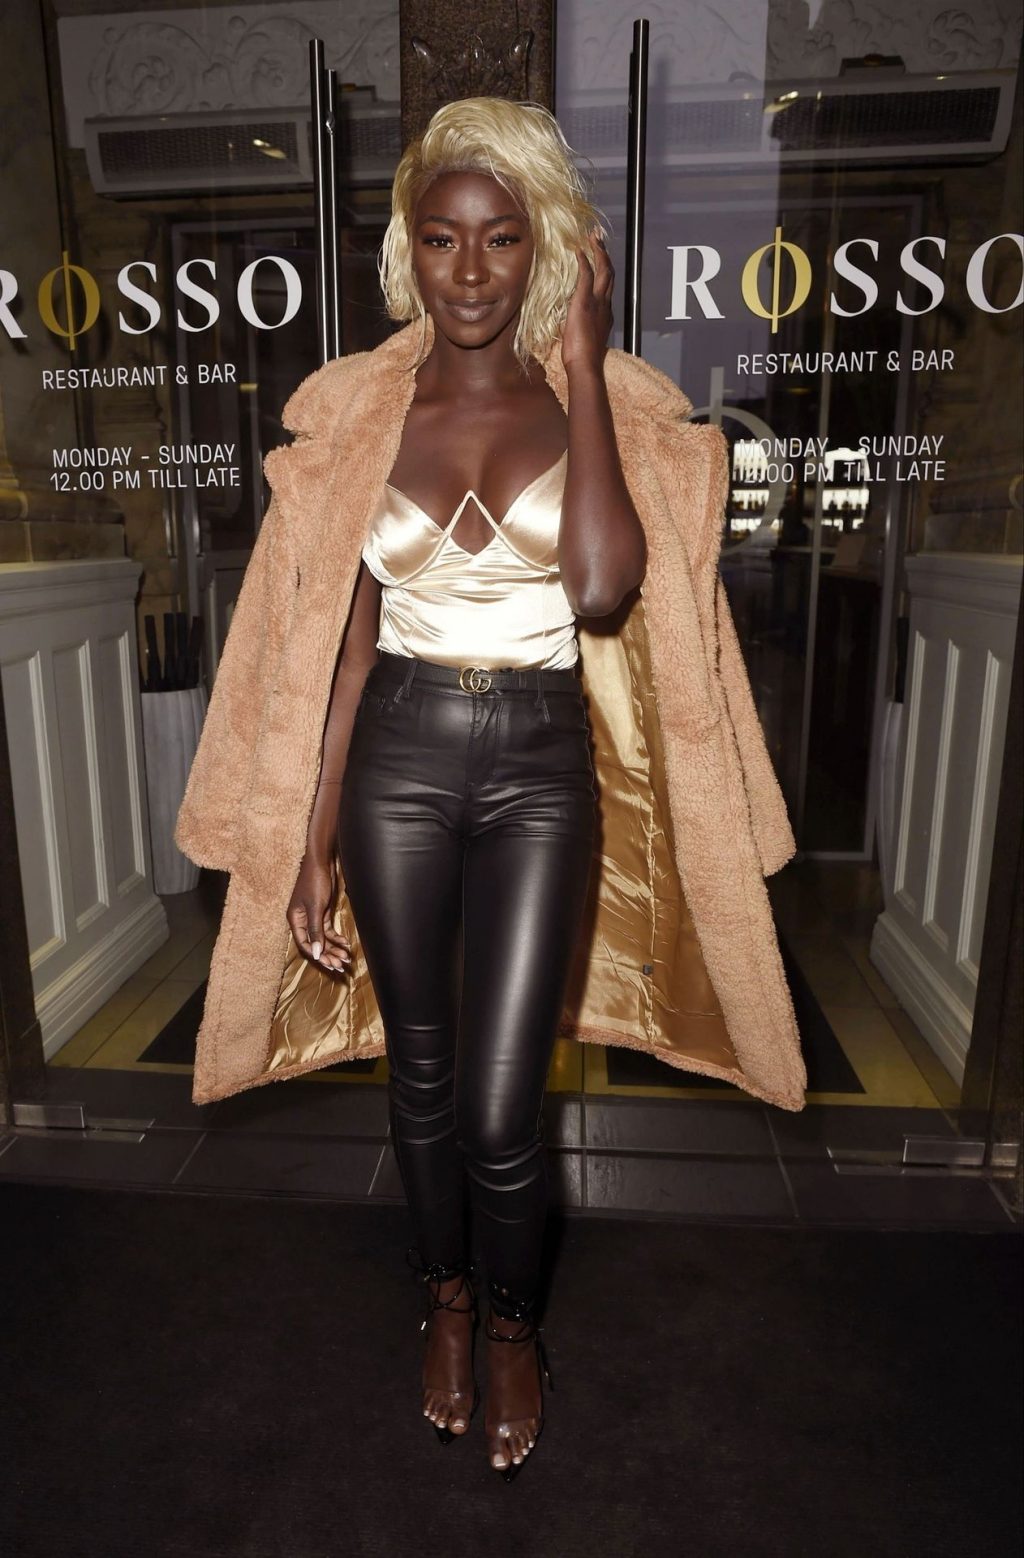 Priscilla Anyabu Looks Sexy at the Rosso Restaurant in Manchester (13 Photos)